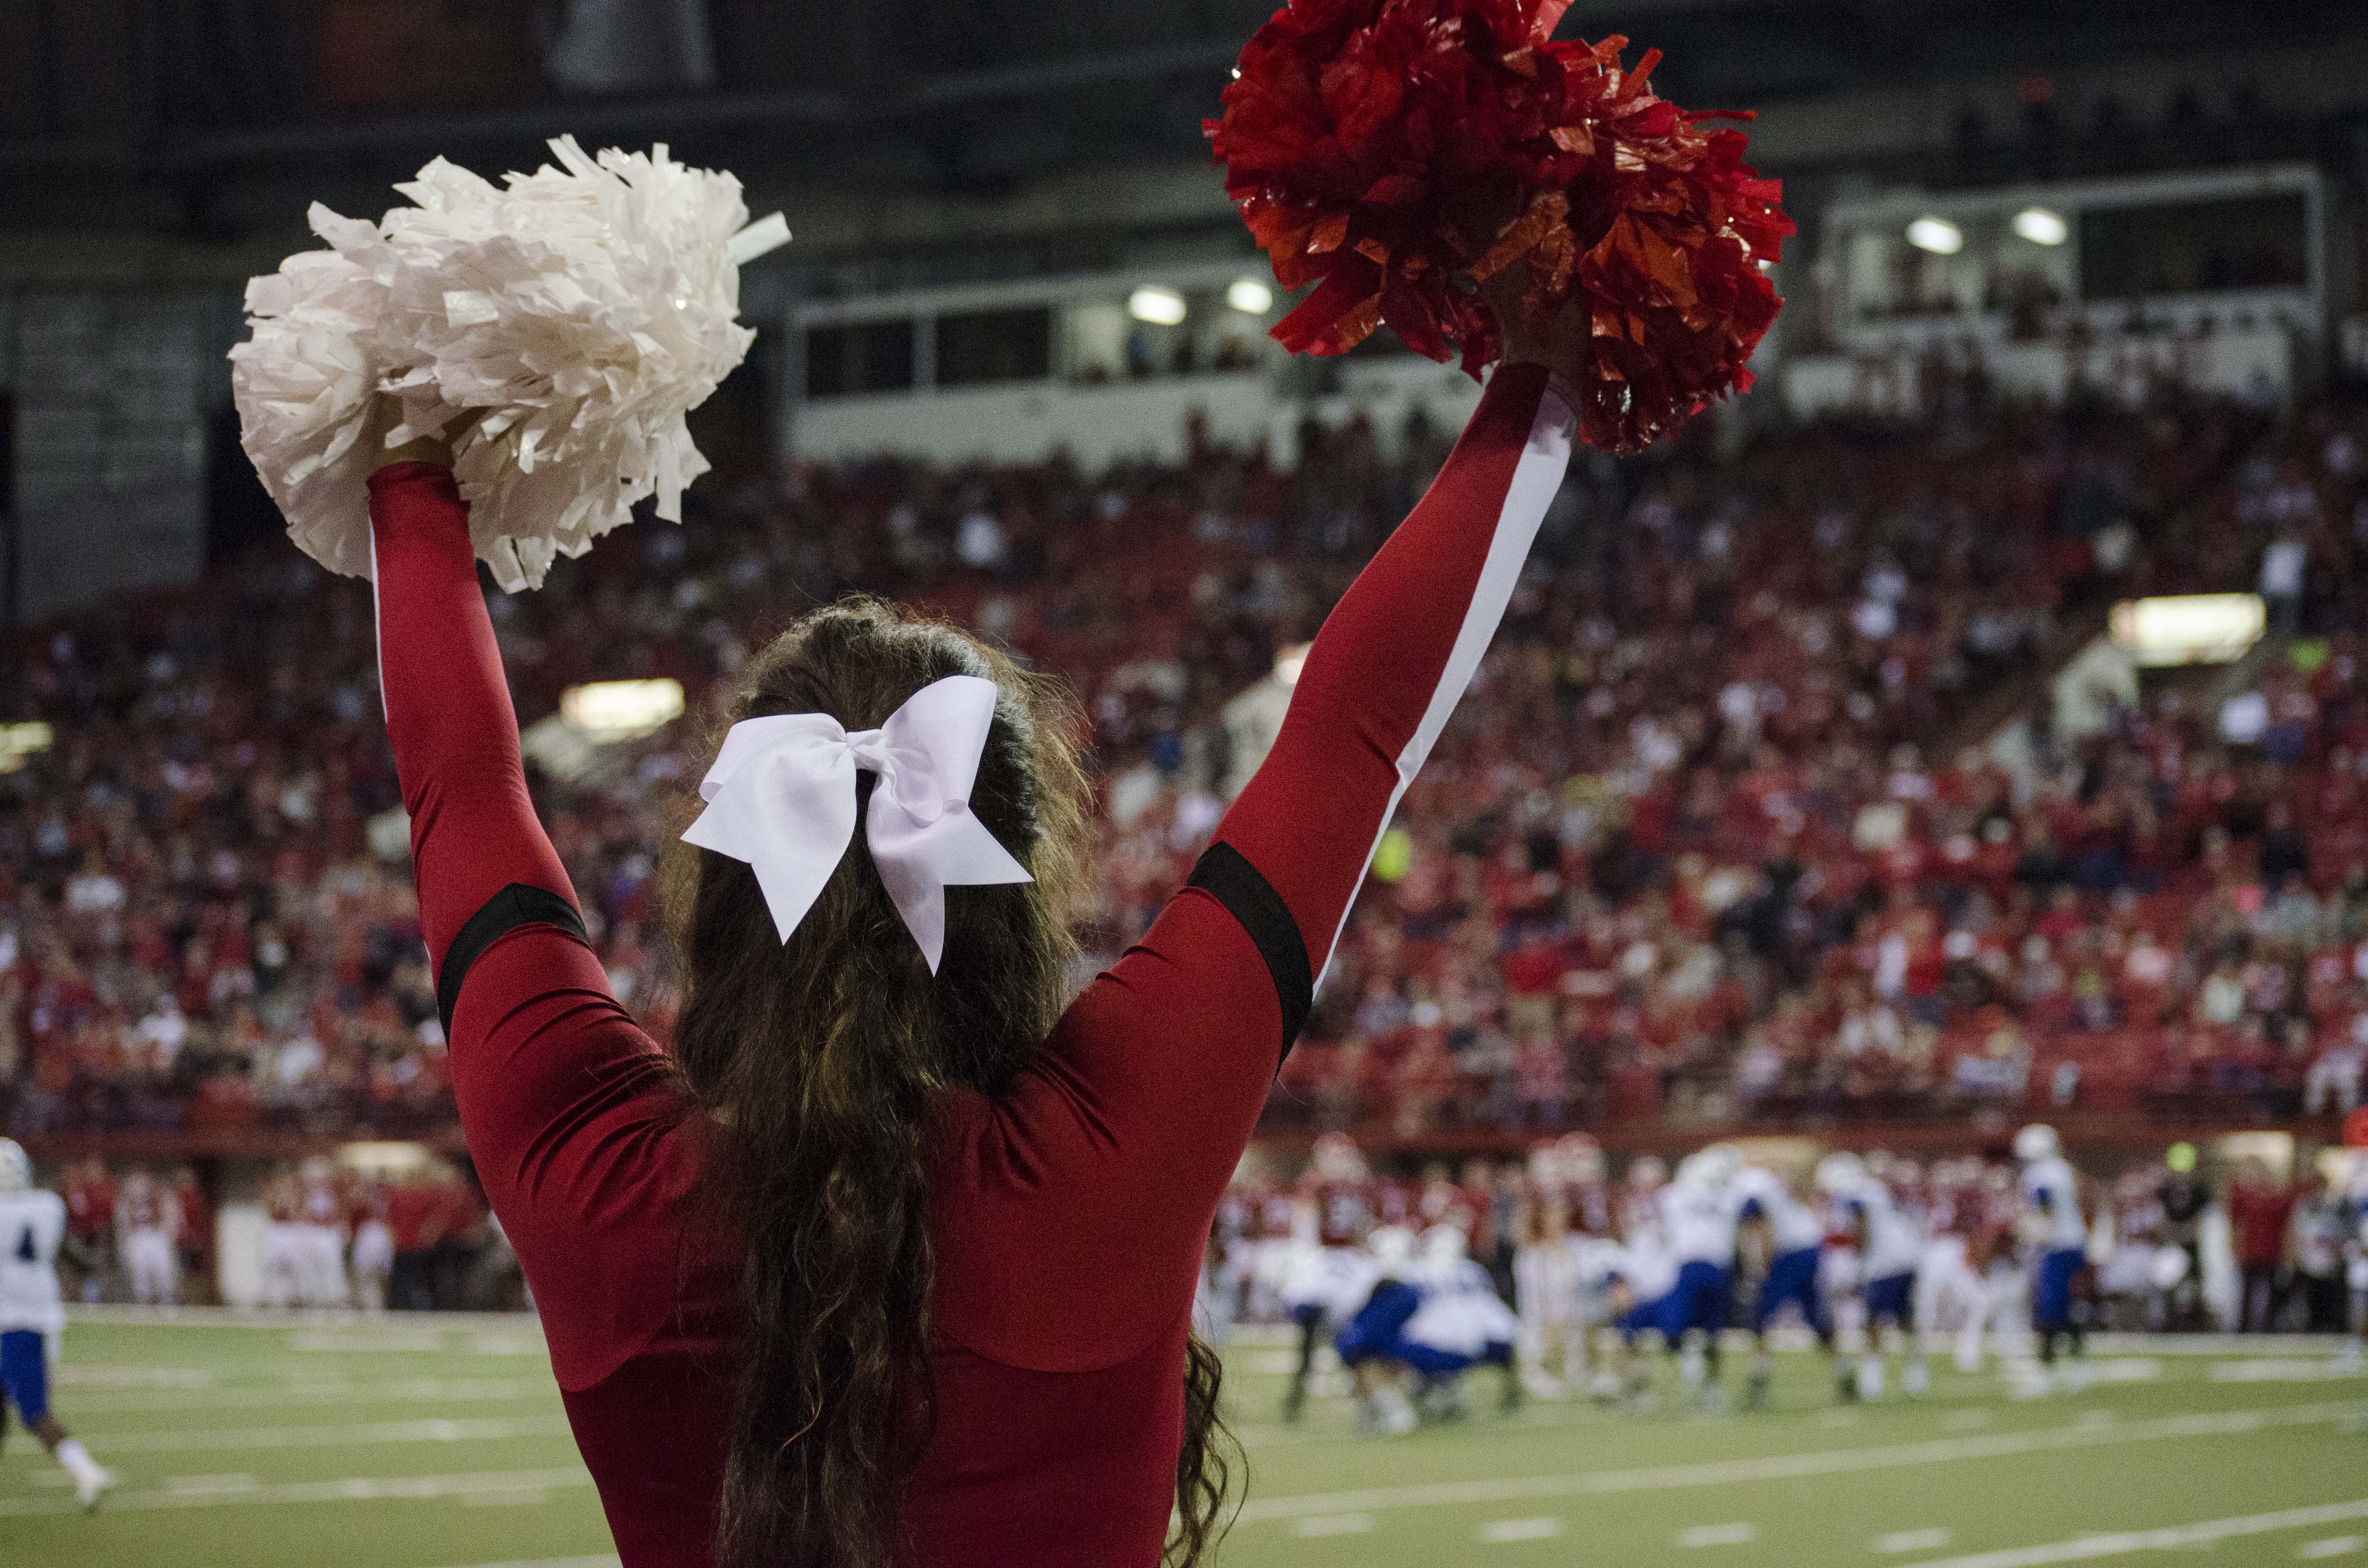 Cheerleading team shares close bond, pride for cheering on USD